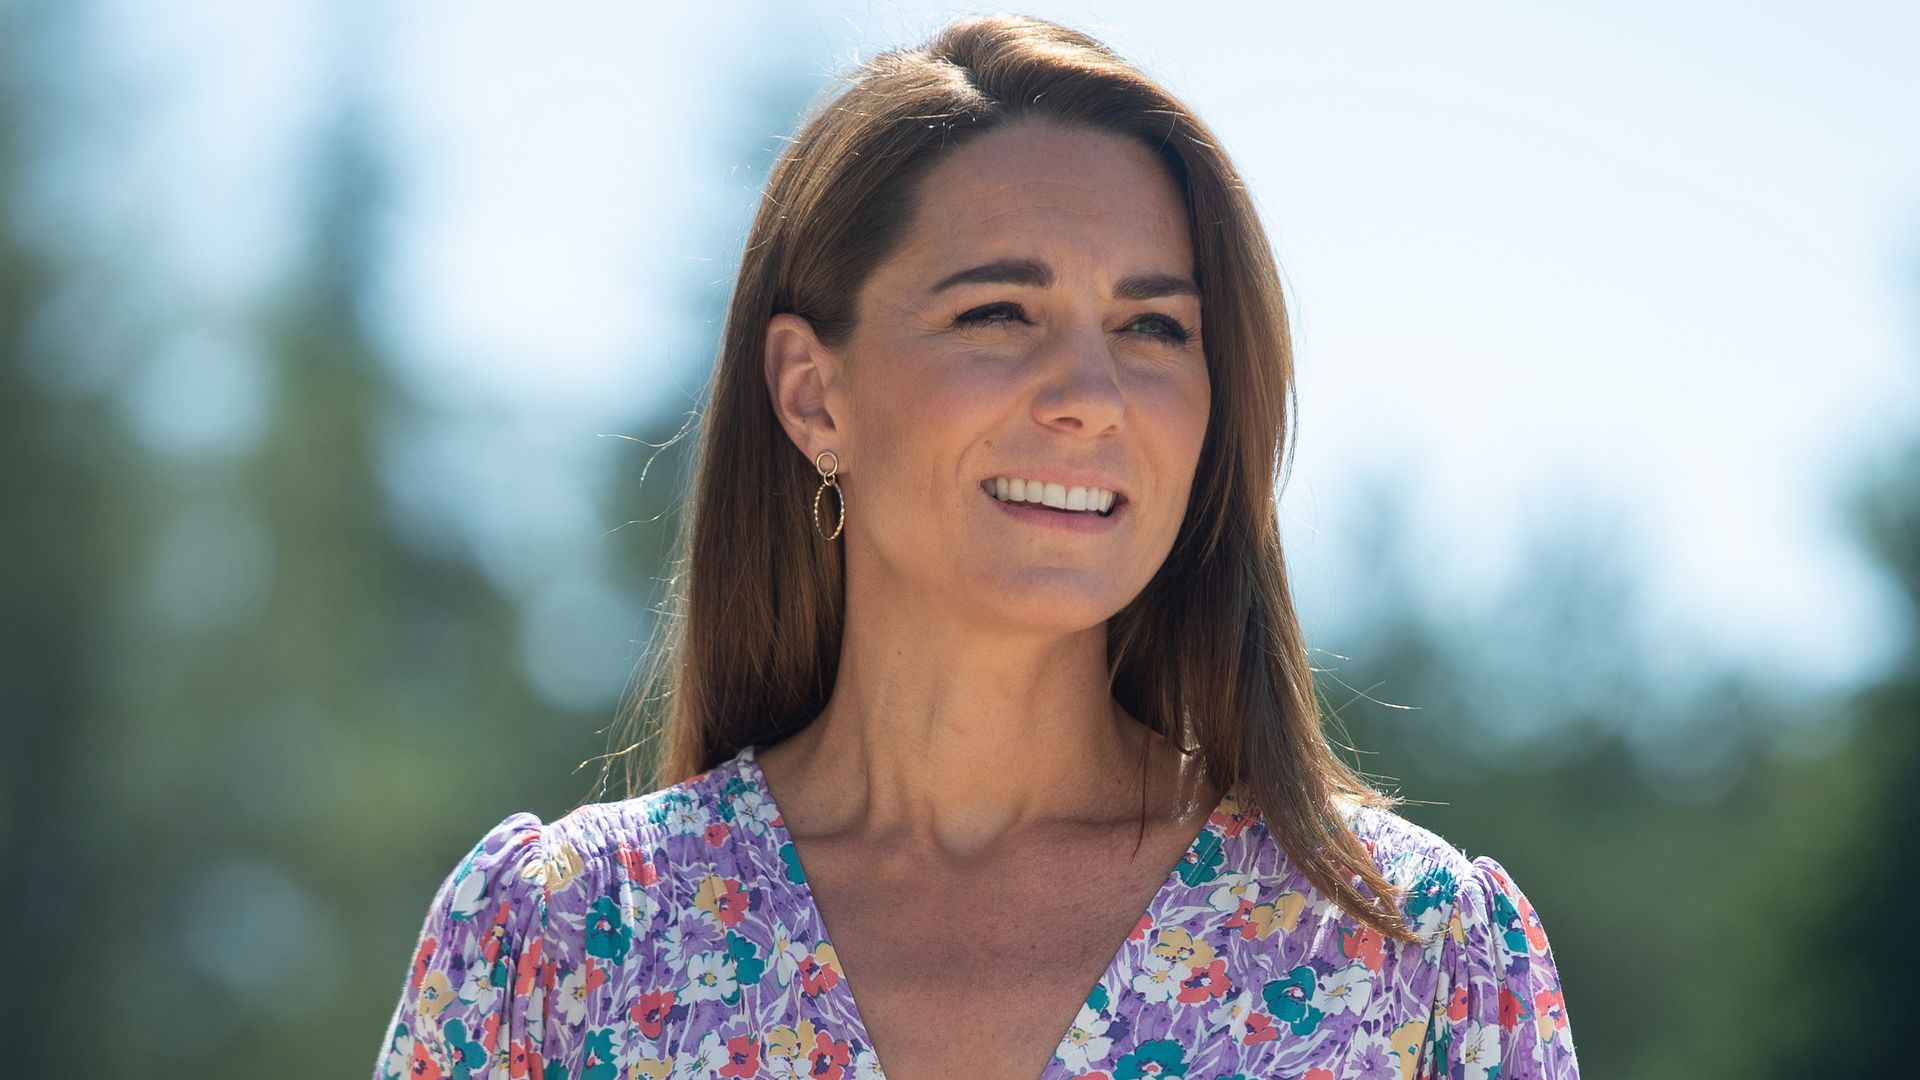  Princess Kate during a visit to The Nook in Norfolk